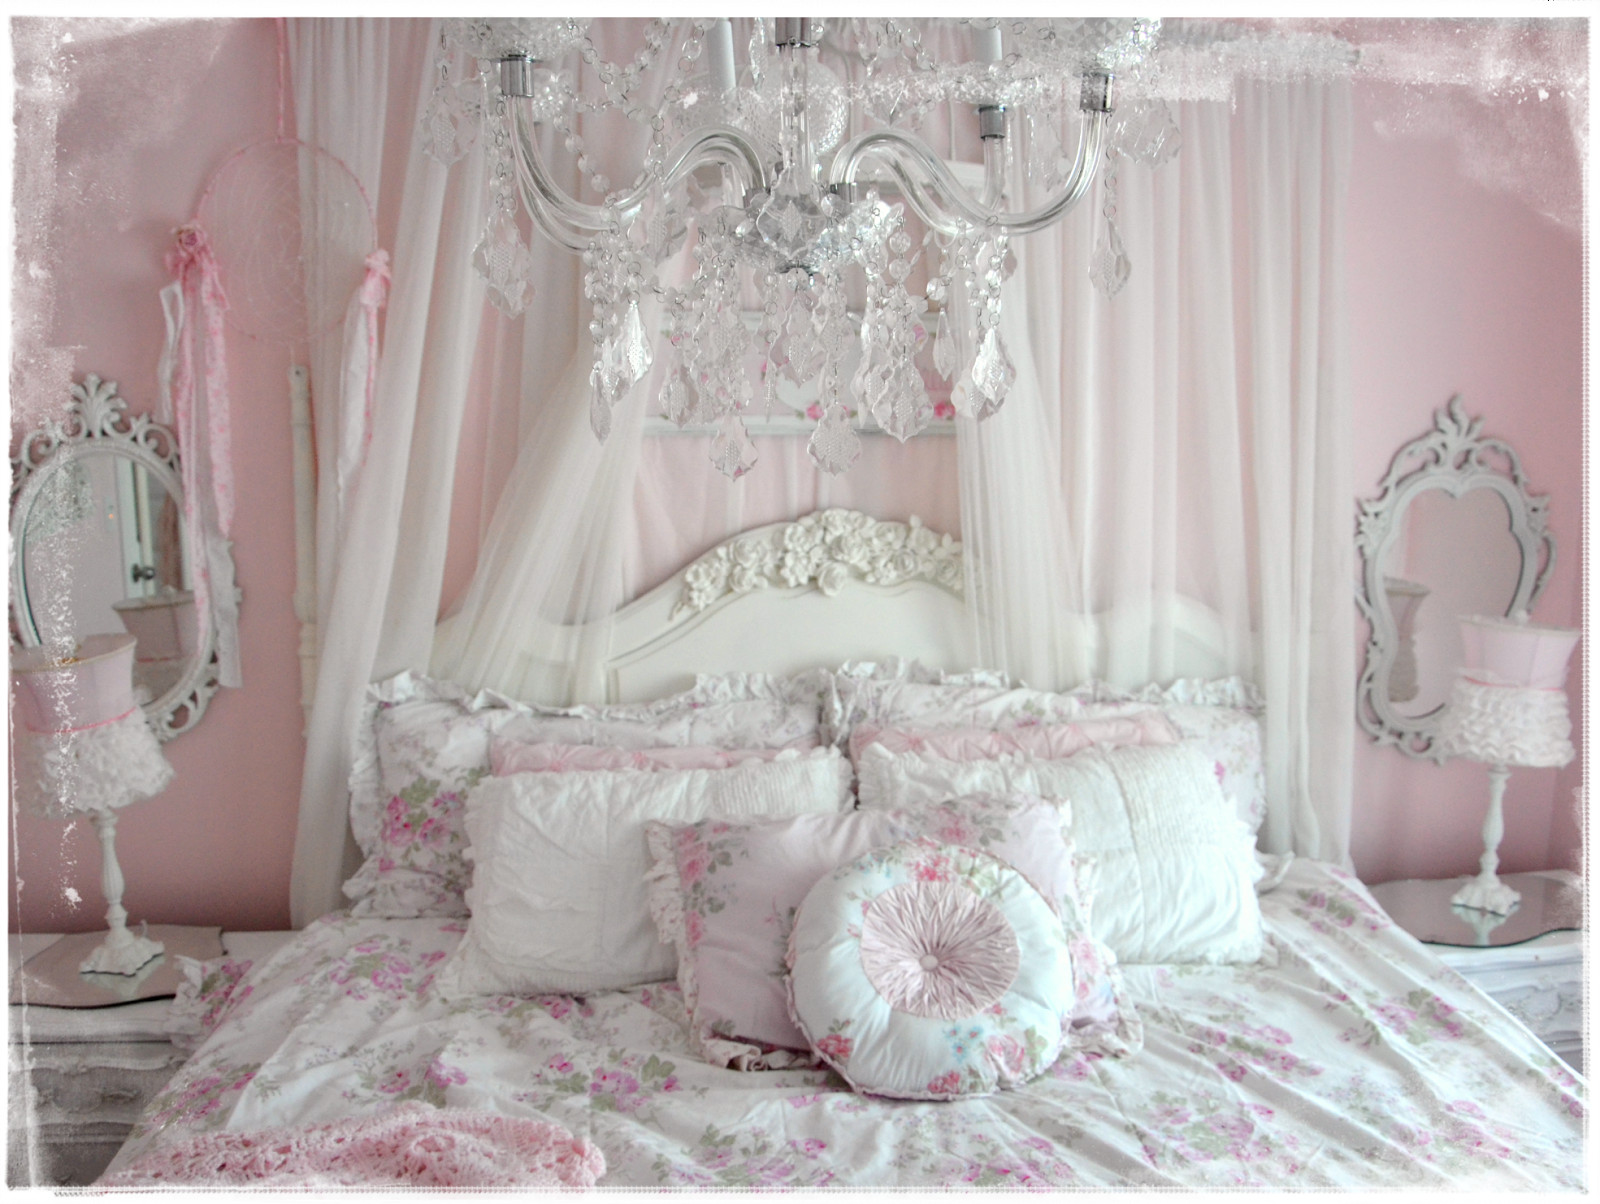 Shabby Chic Bedroom Accessories
 Not So Shabby Shabby Chic New Simply Shabby Chic Bedding